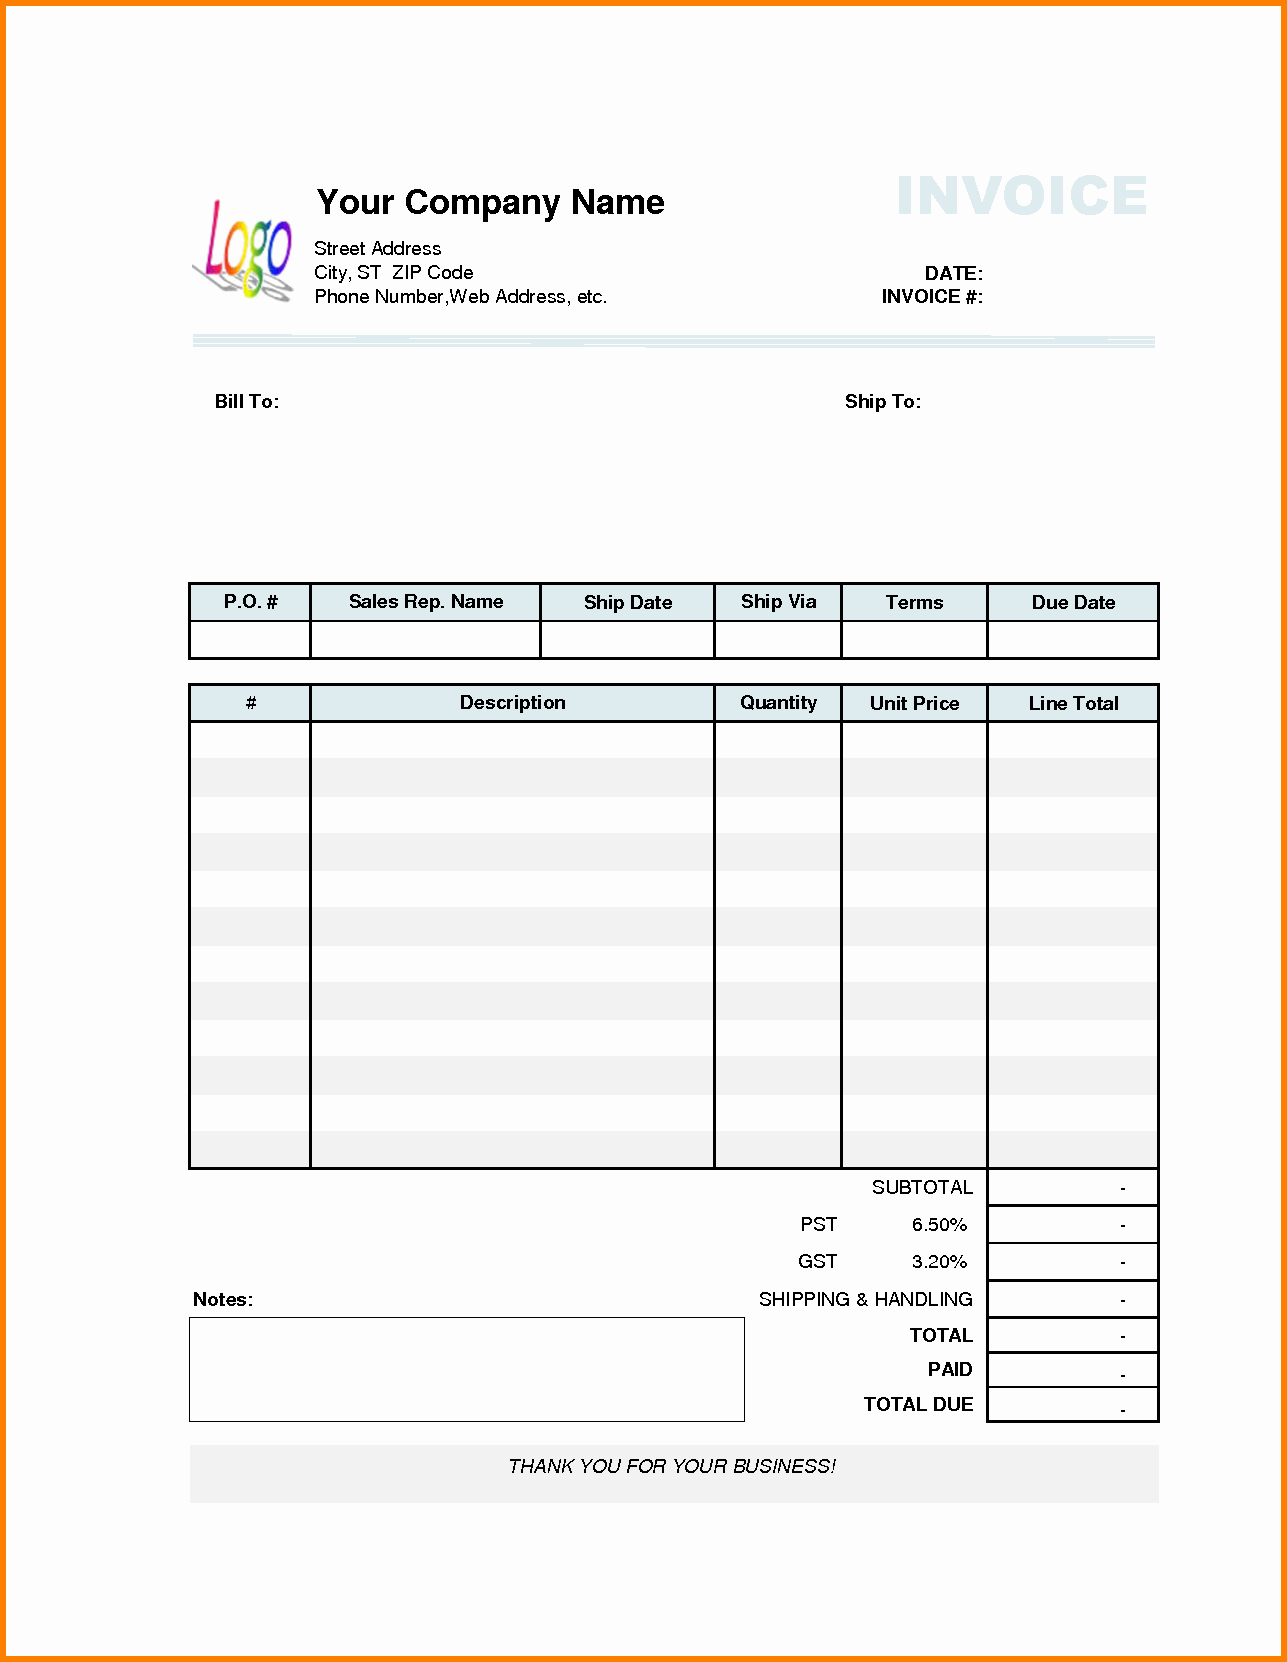 Paid In Full Receipt Template Best Of Paid In Full Receipt Template Portablegasgrillweber